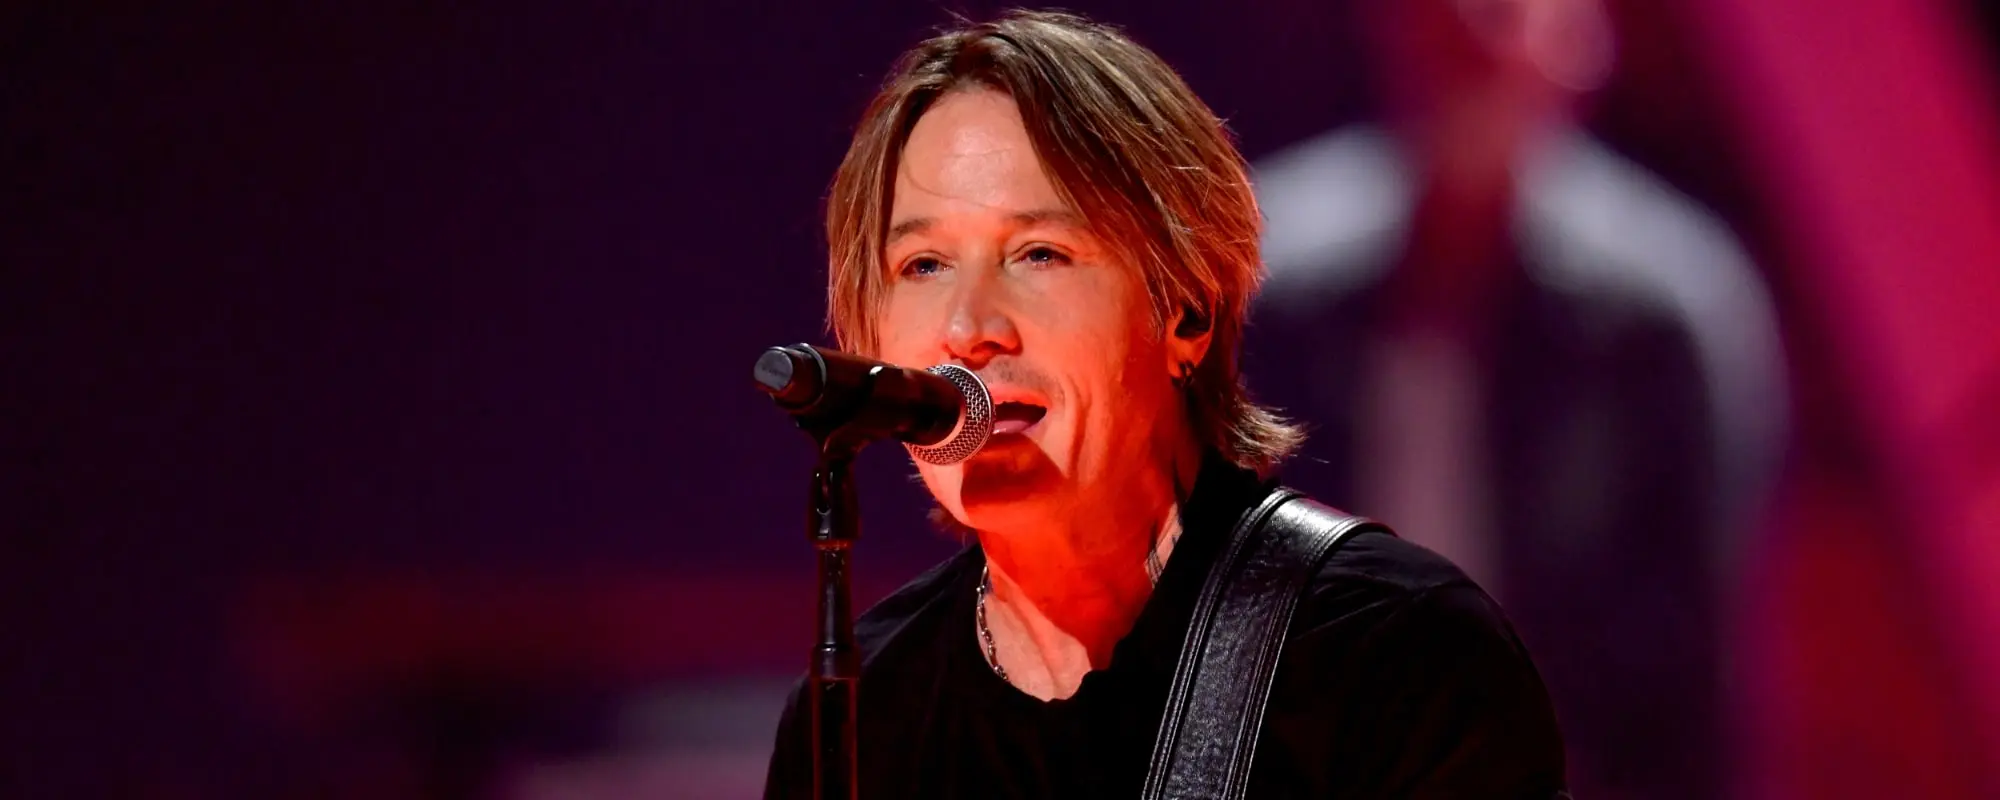 Keith Urban Shares Snippet of New Song “Go Home W U” Featuring Lainey Wilson—and Fans Can’t Get Enough